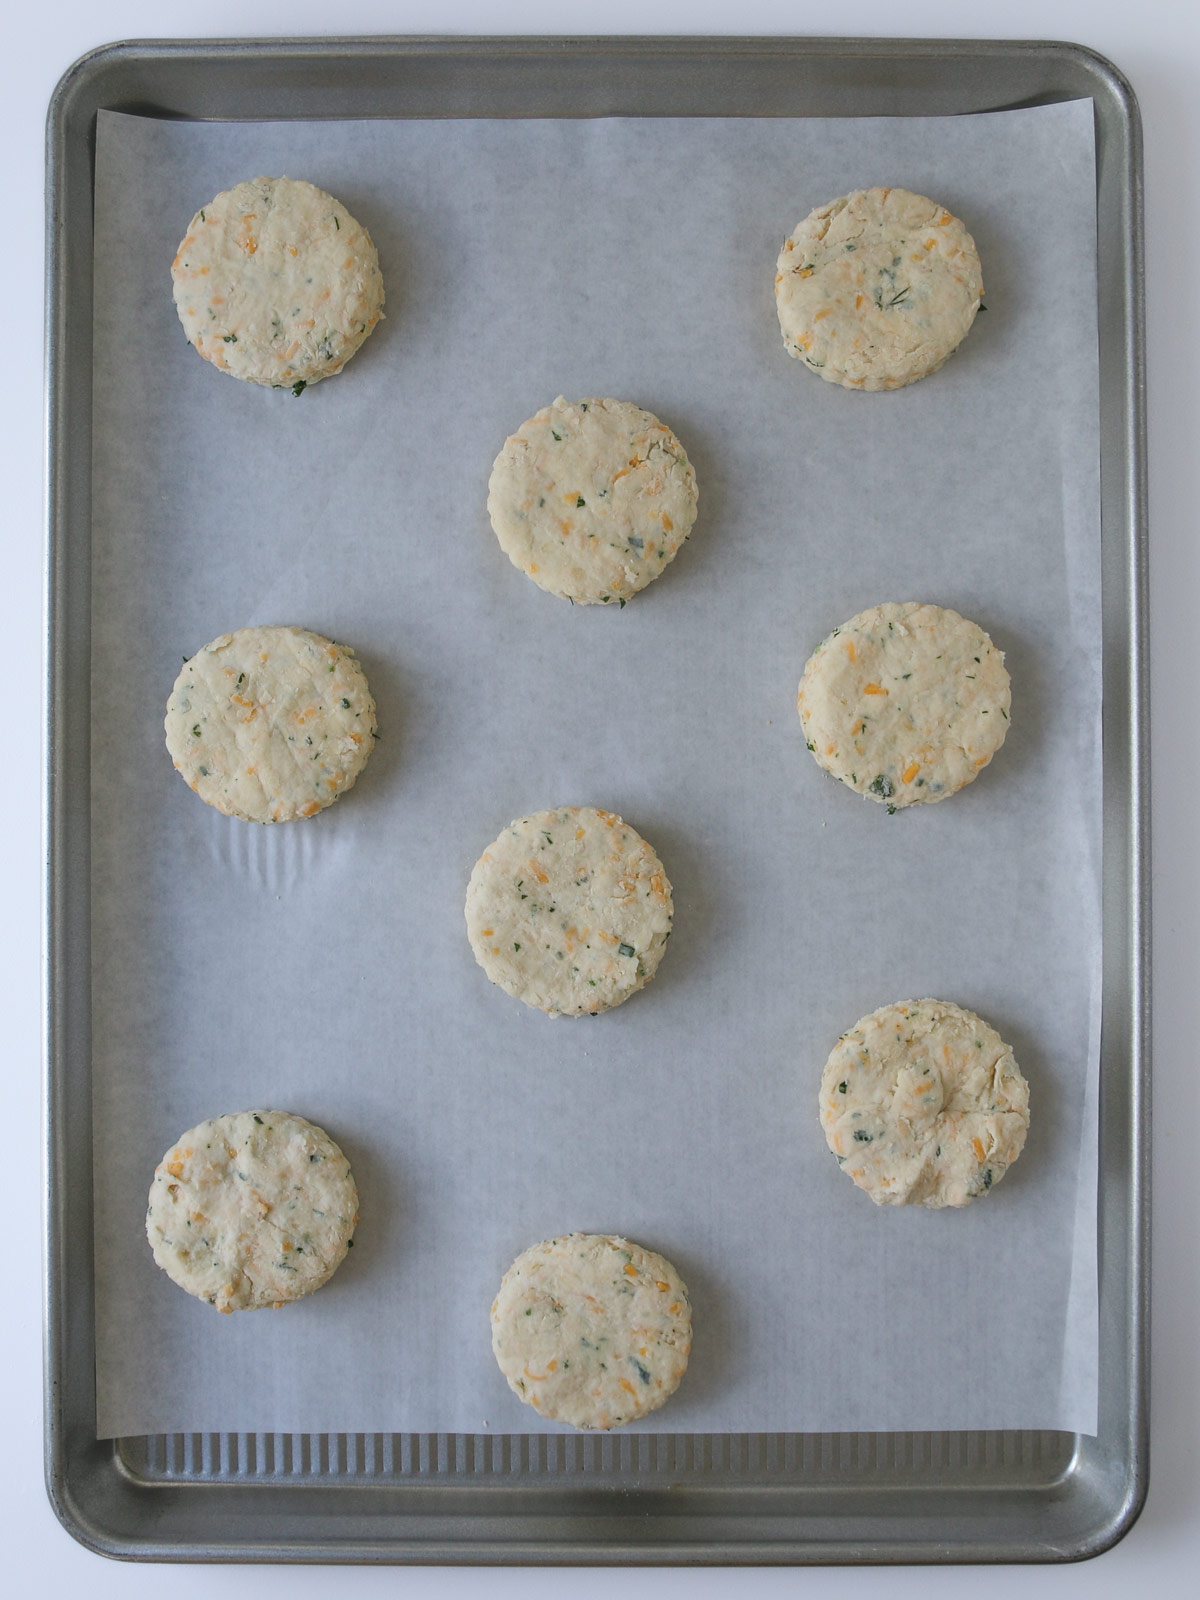 rounds placed on lined baking sheet.